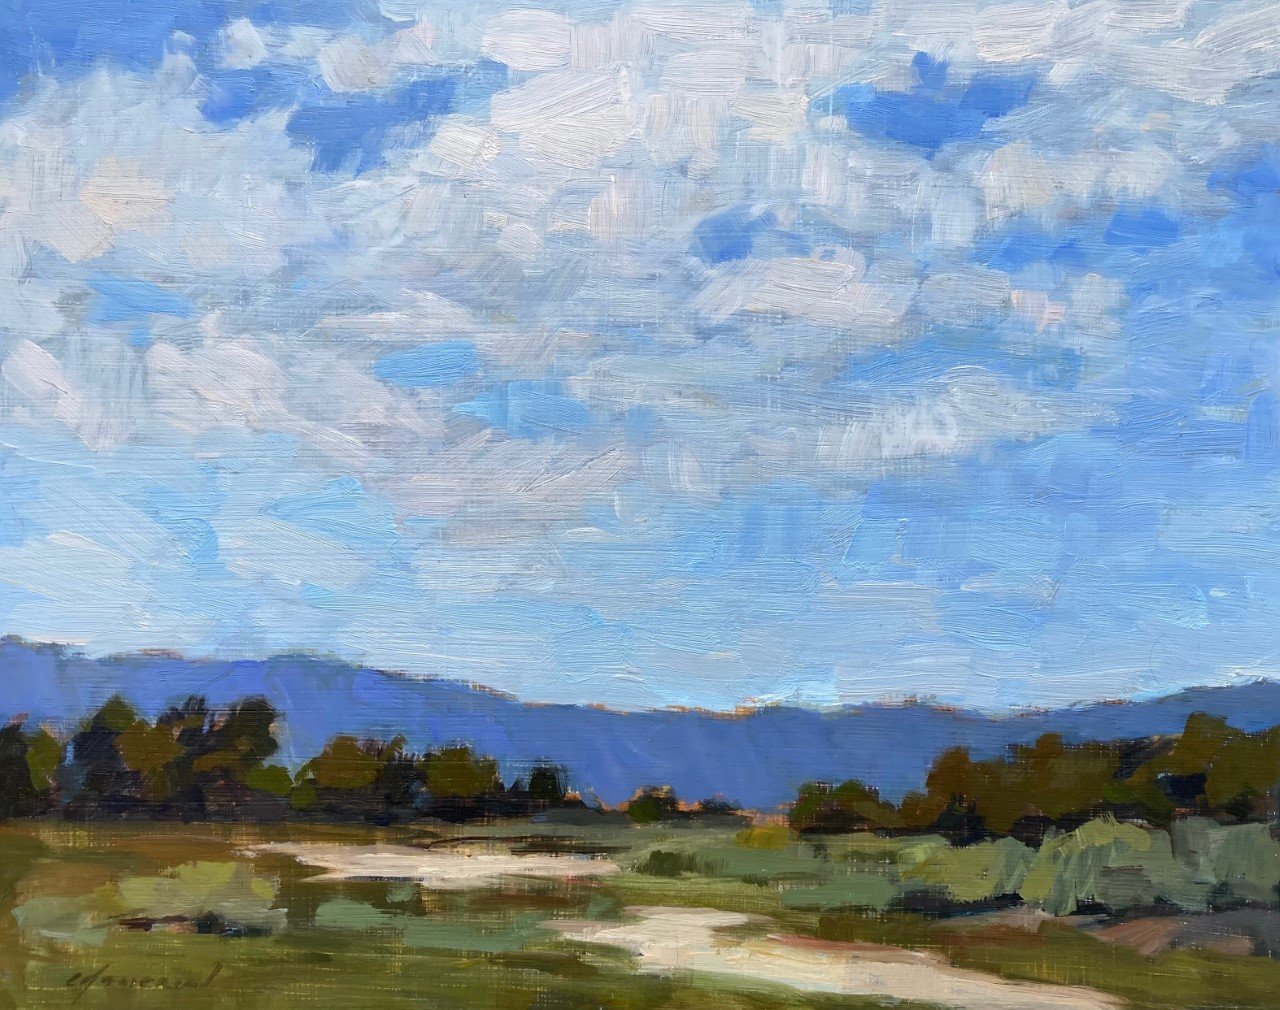 Clouds Over Baylands by Michael Chamberlain